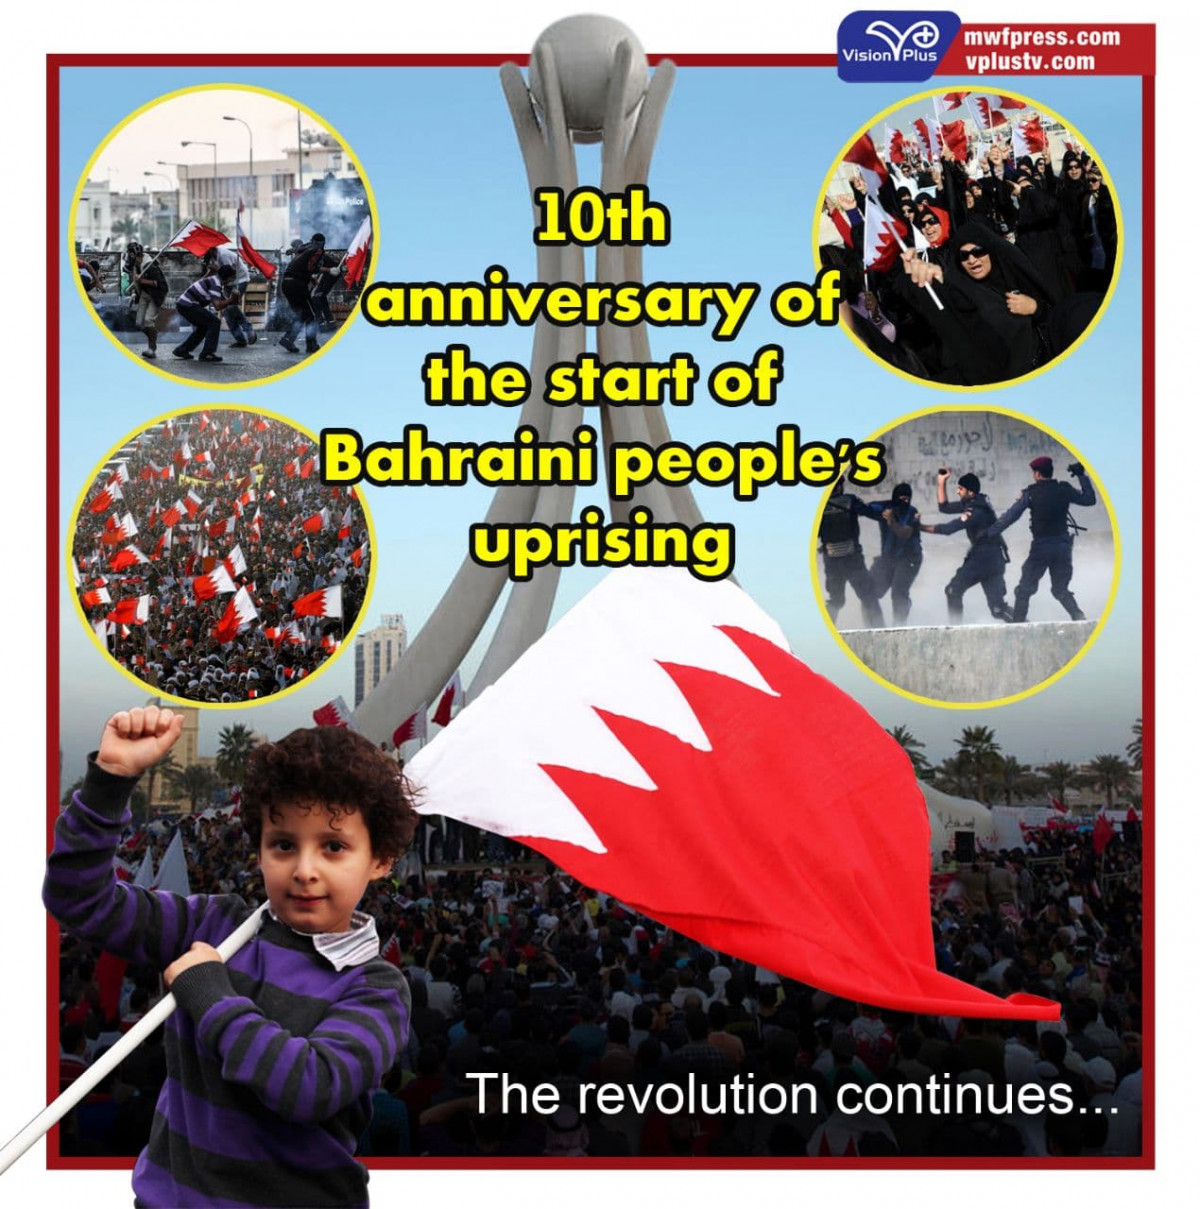 10th anniversary of the start of Bahraini people's uprising